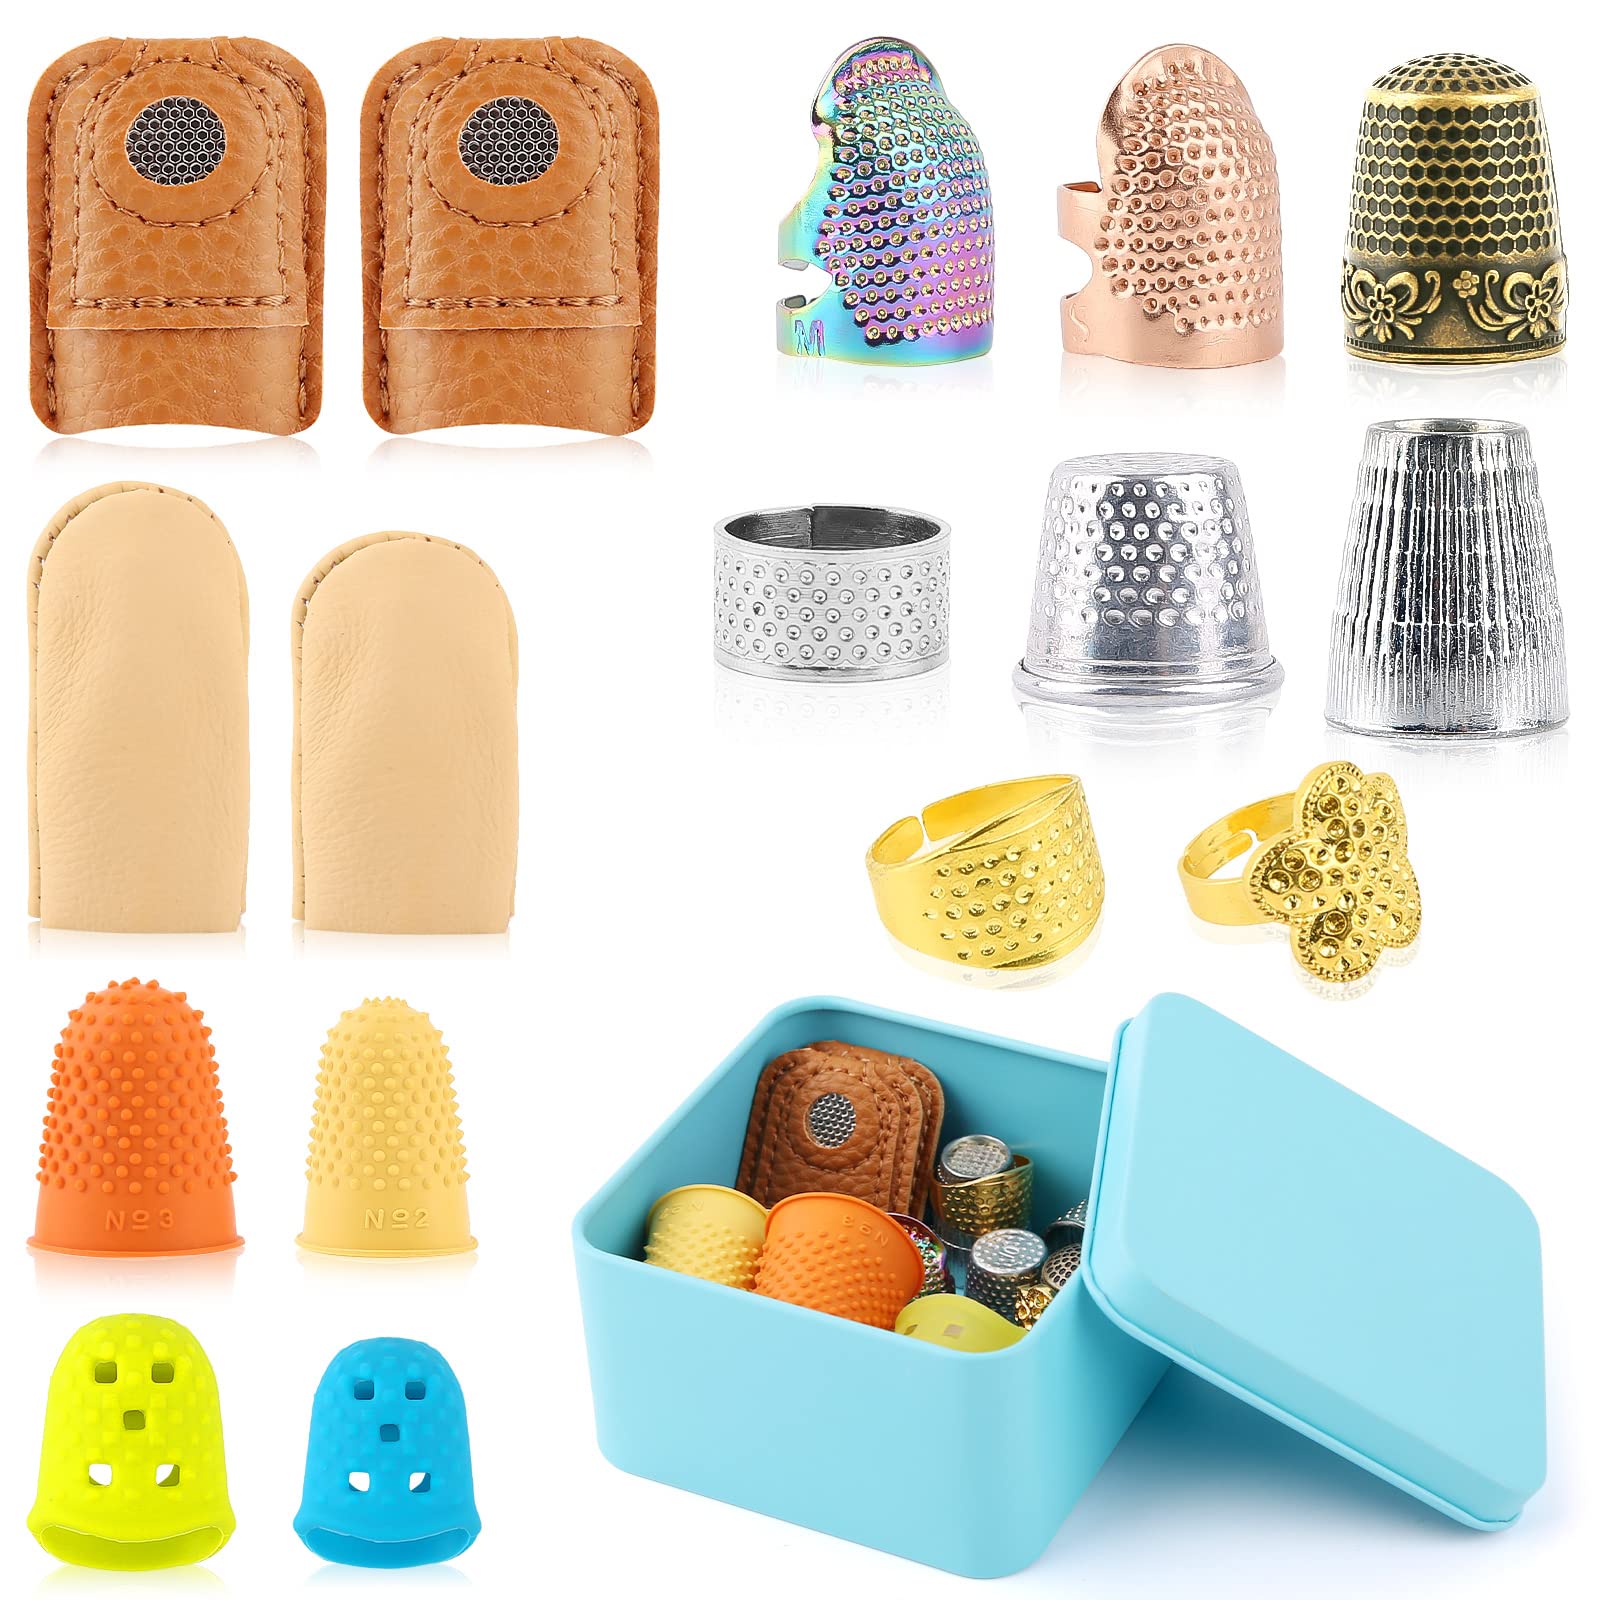 Buy Leather Thimble online